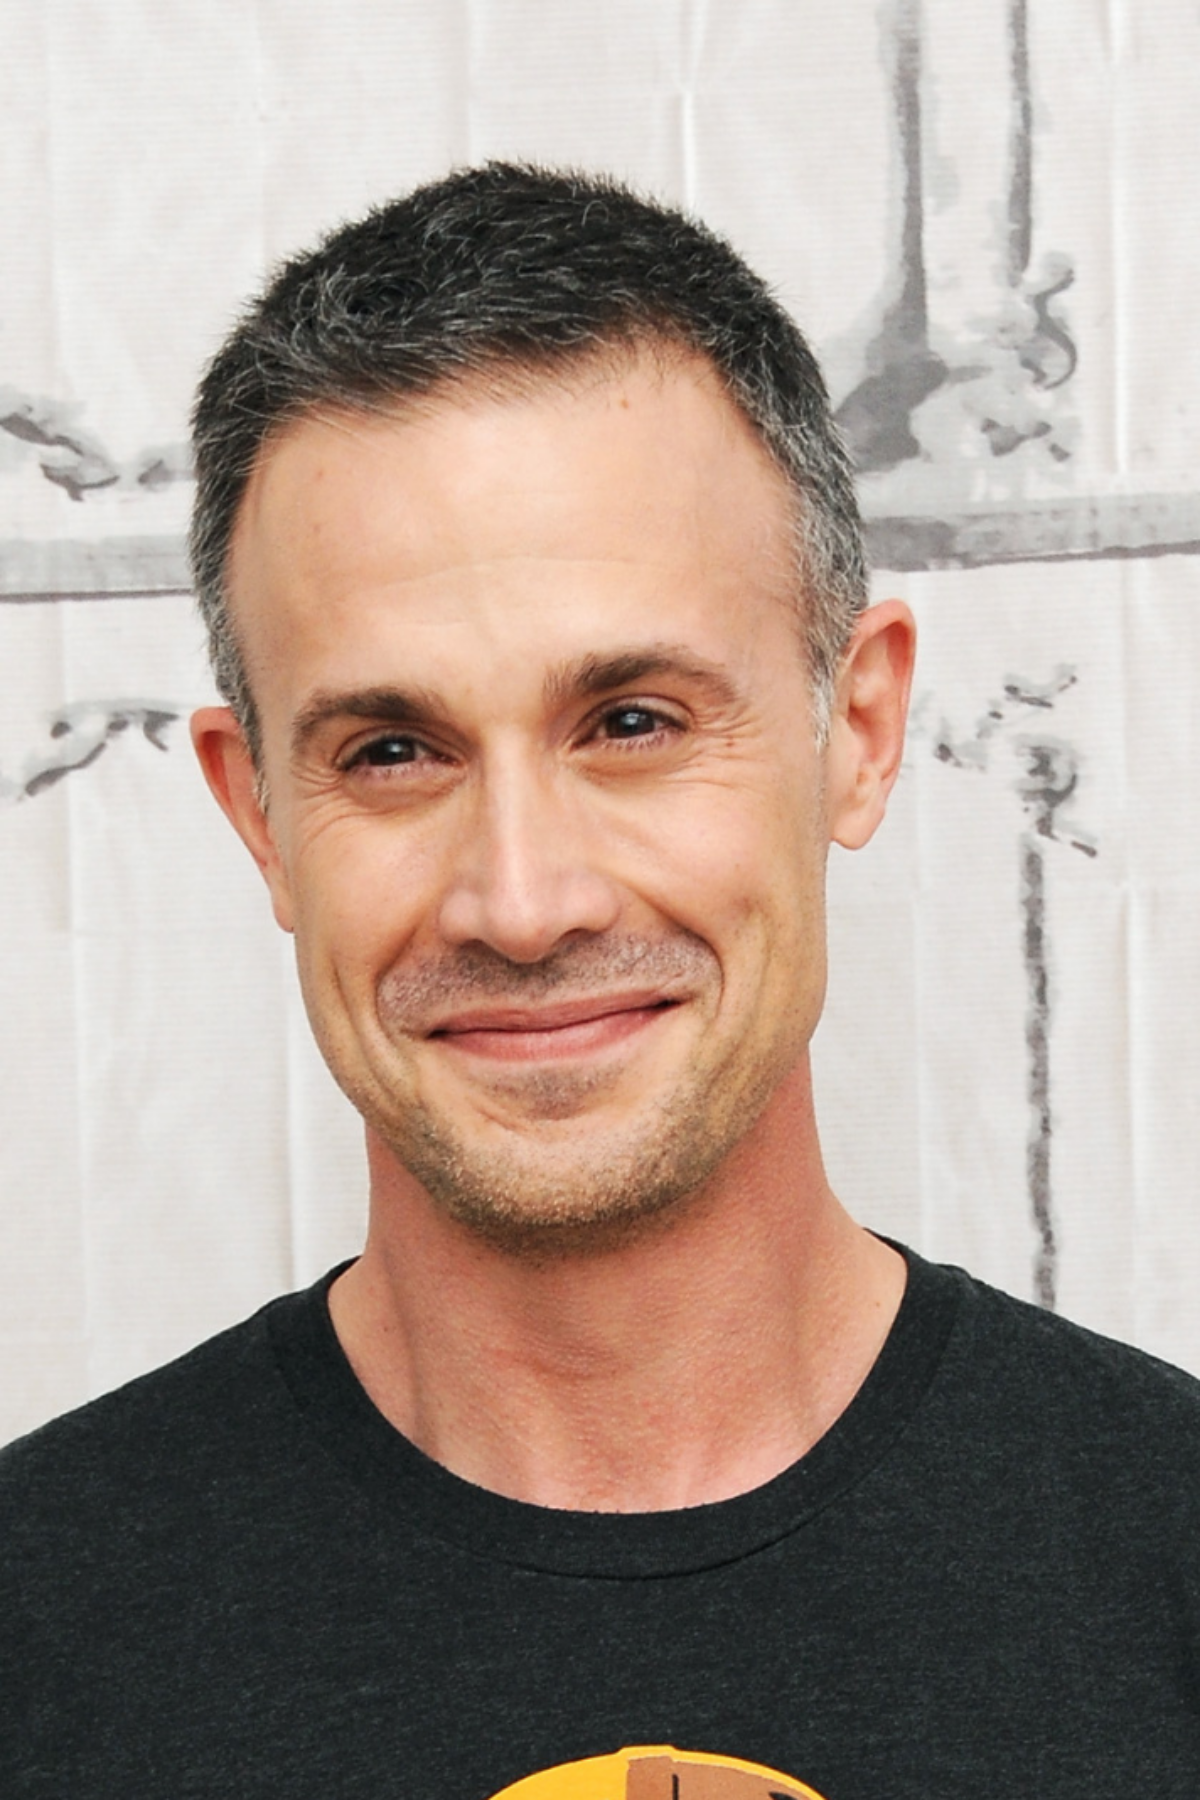 NEW YORK, NY - JUNE 07: Actor Freddie Prinze Jr. discusses his new cookbook 'Back to the Kitchen' during AOL Build Speaker Series at AOL Studios In New York on June 7, 2016 in New York City. (Photo by Desiree Navarro/WireImage)